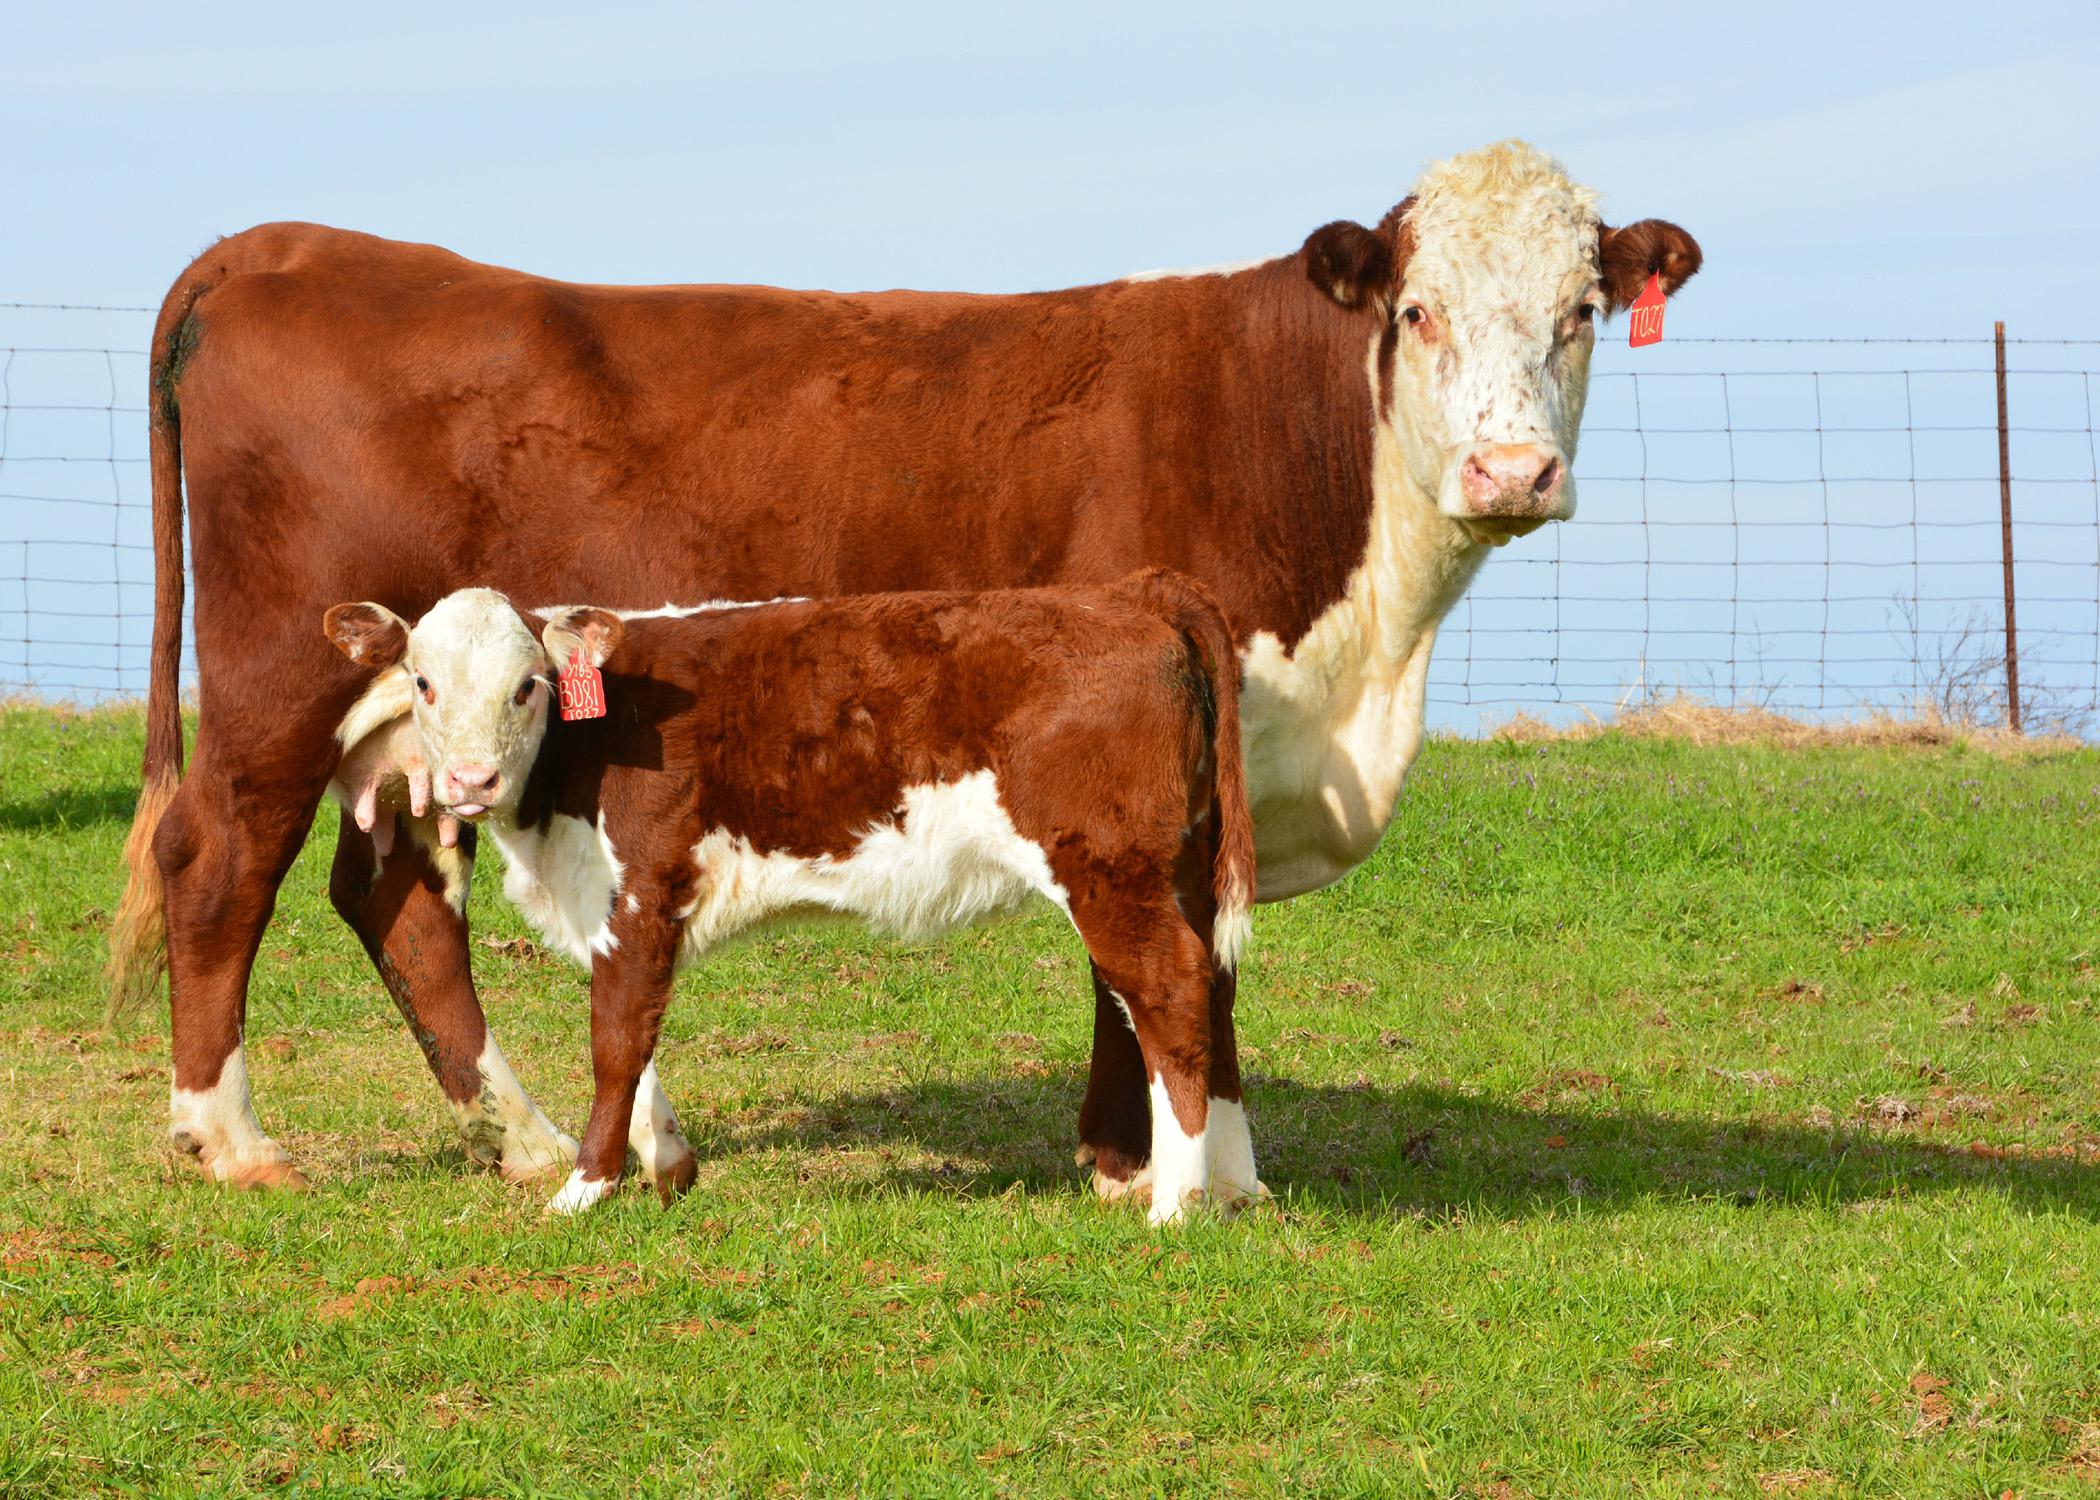 Beef cattle, such as these Herefords in Oktibbeha County, are part of Mississippi's fifth most valuable agricultural commodity in the state for 2014. This mother and calf are part of the Mississippi State University herd on the Henry H. Leveck Research Farm on the south side of the MSU campus on Dec. 17, 2014. (Photo by MSU Ag Communications/Linda Breazeale)